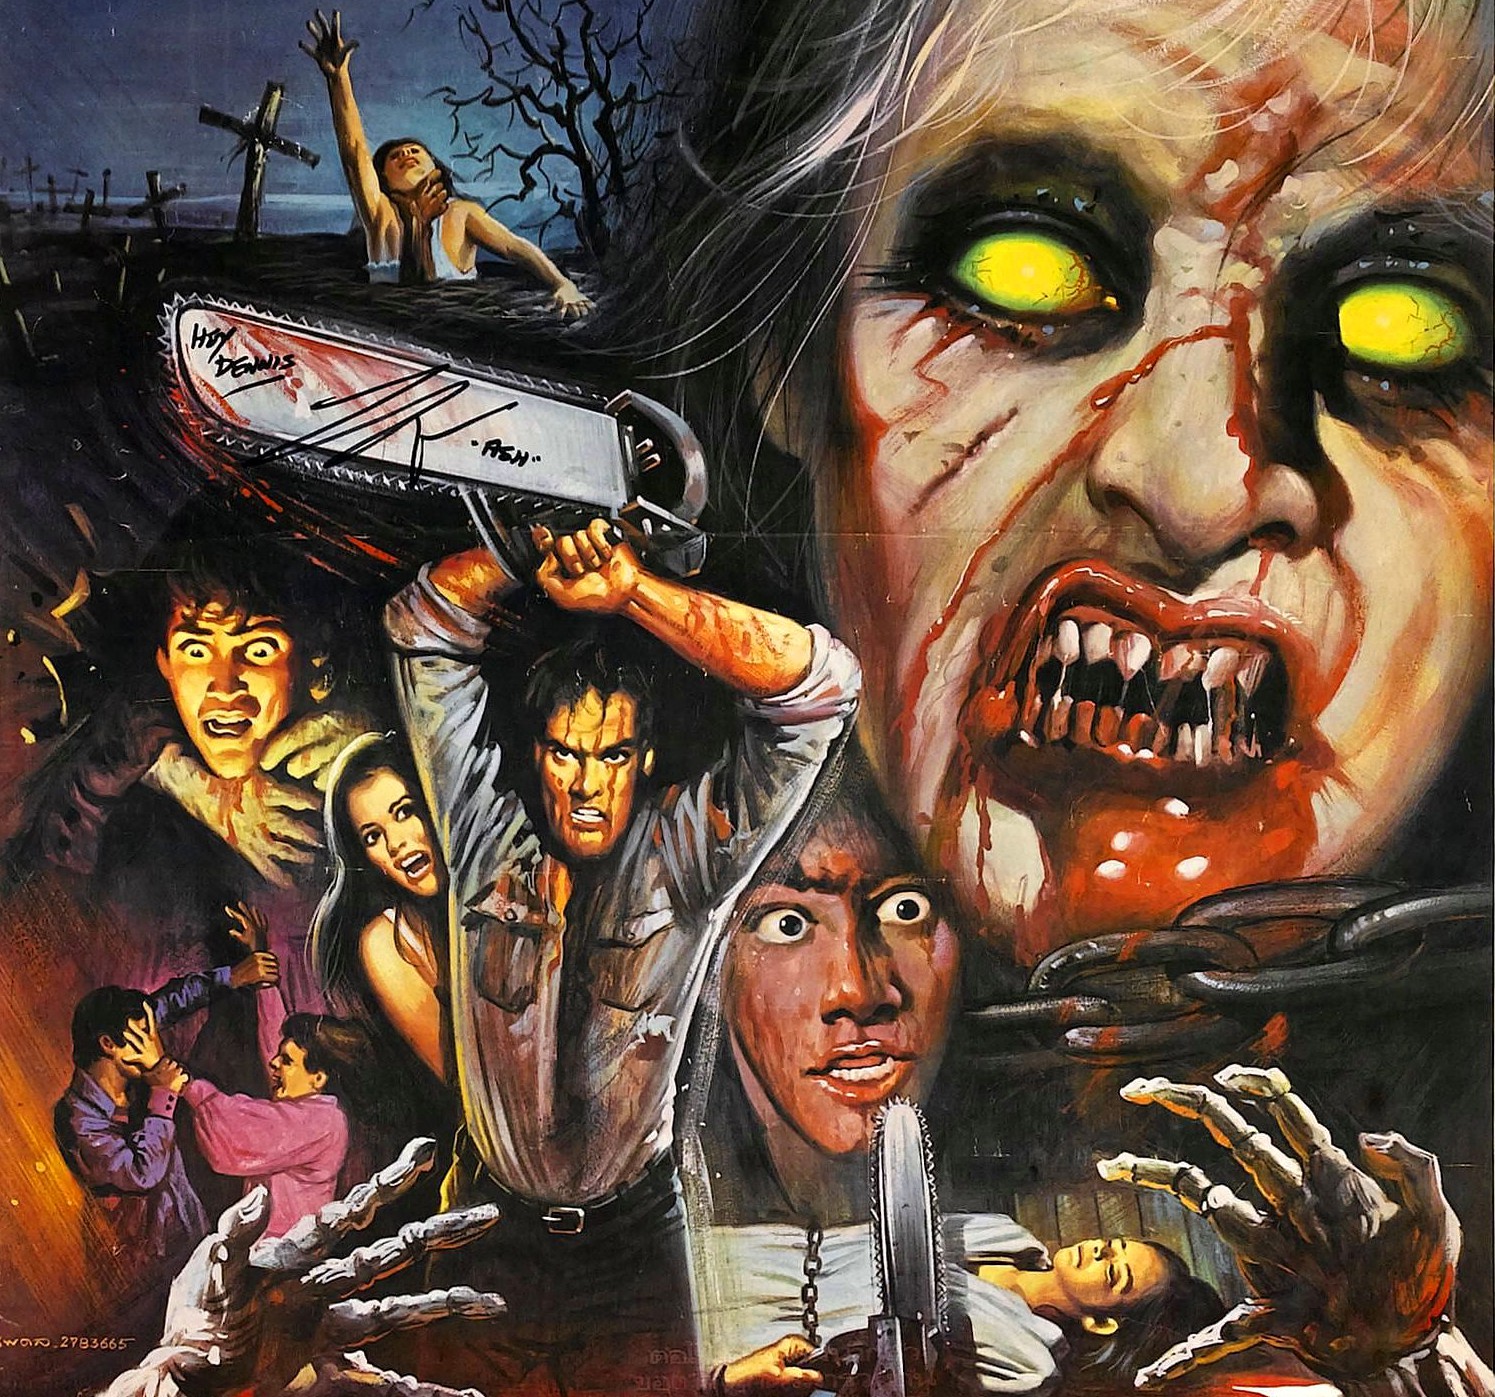 The Evil Dead (1981) Movie Review